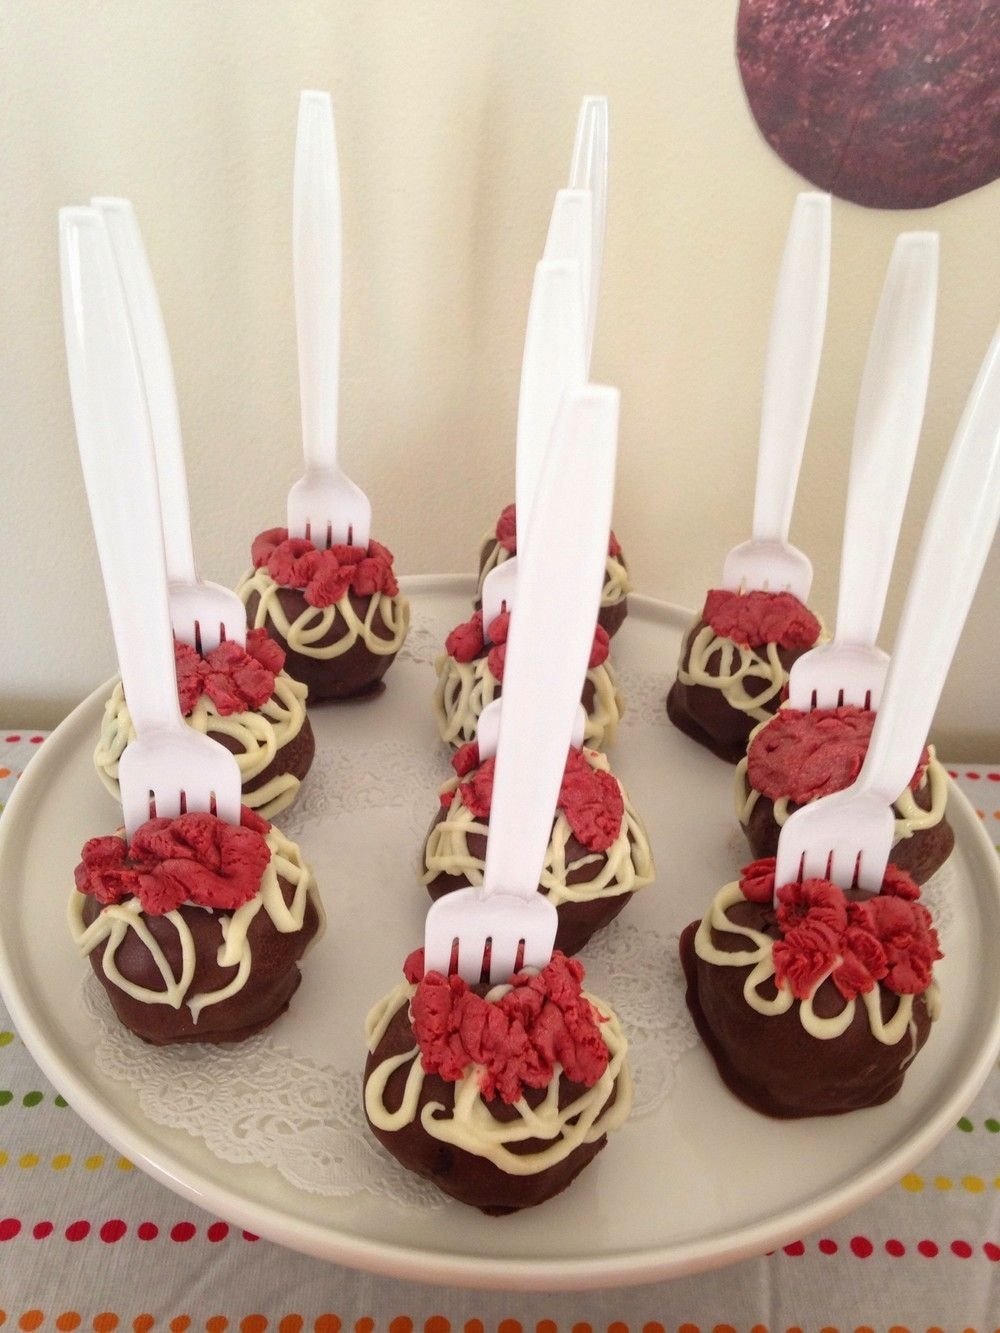 10 Cute Cloudy With A Chance Of Meatballs Party Ideas cloudy with a chance of meatballs party ideas cake pop spaghetti 2022